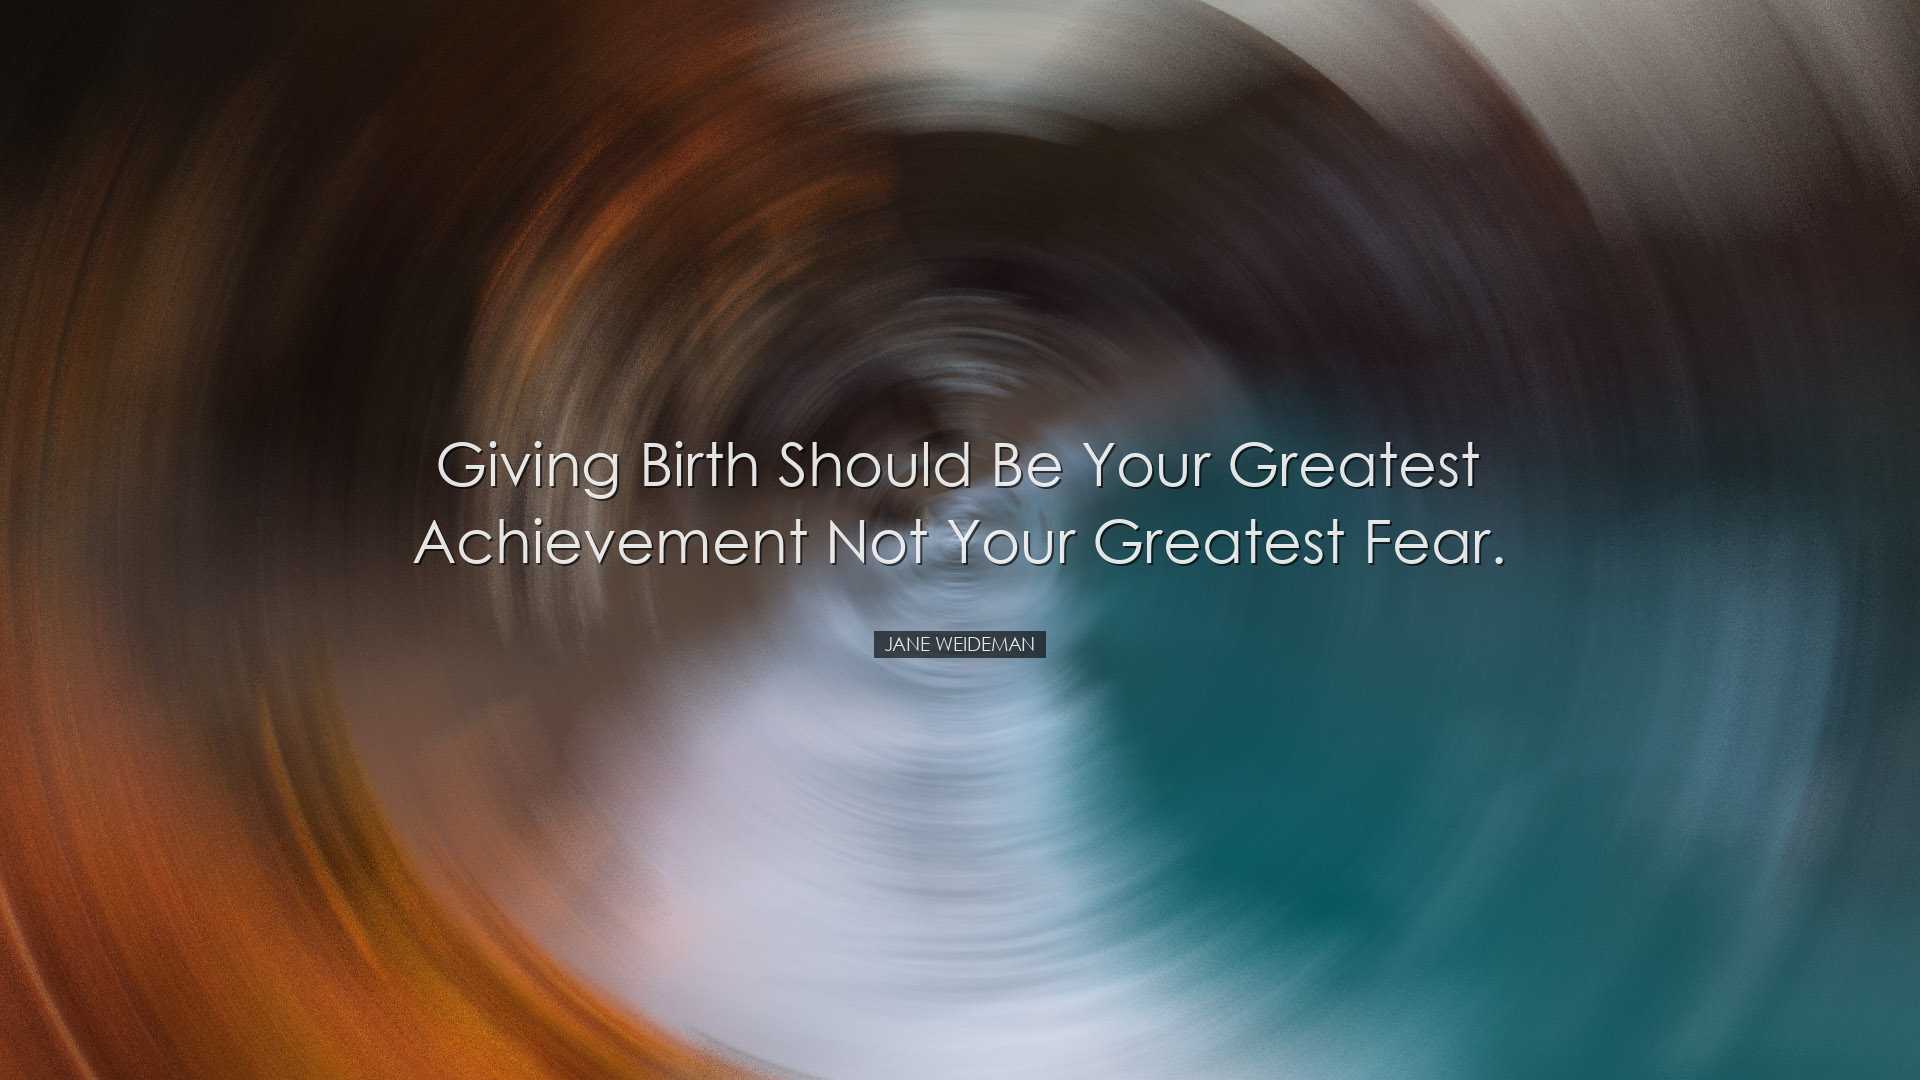 Giving birth should be your greatest achievement not your greatest